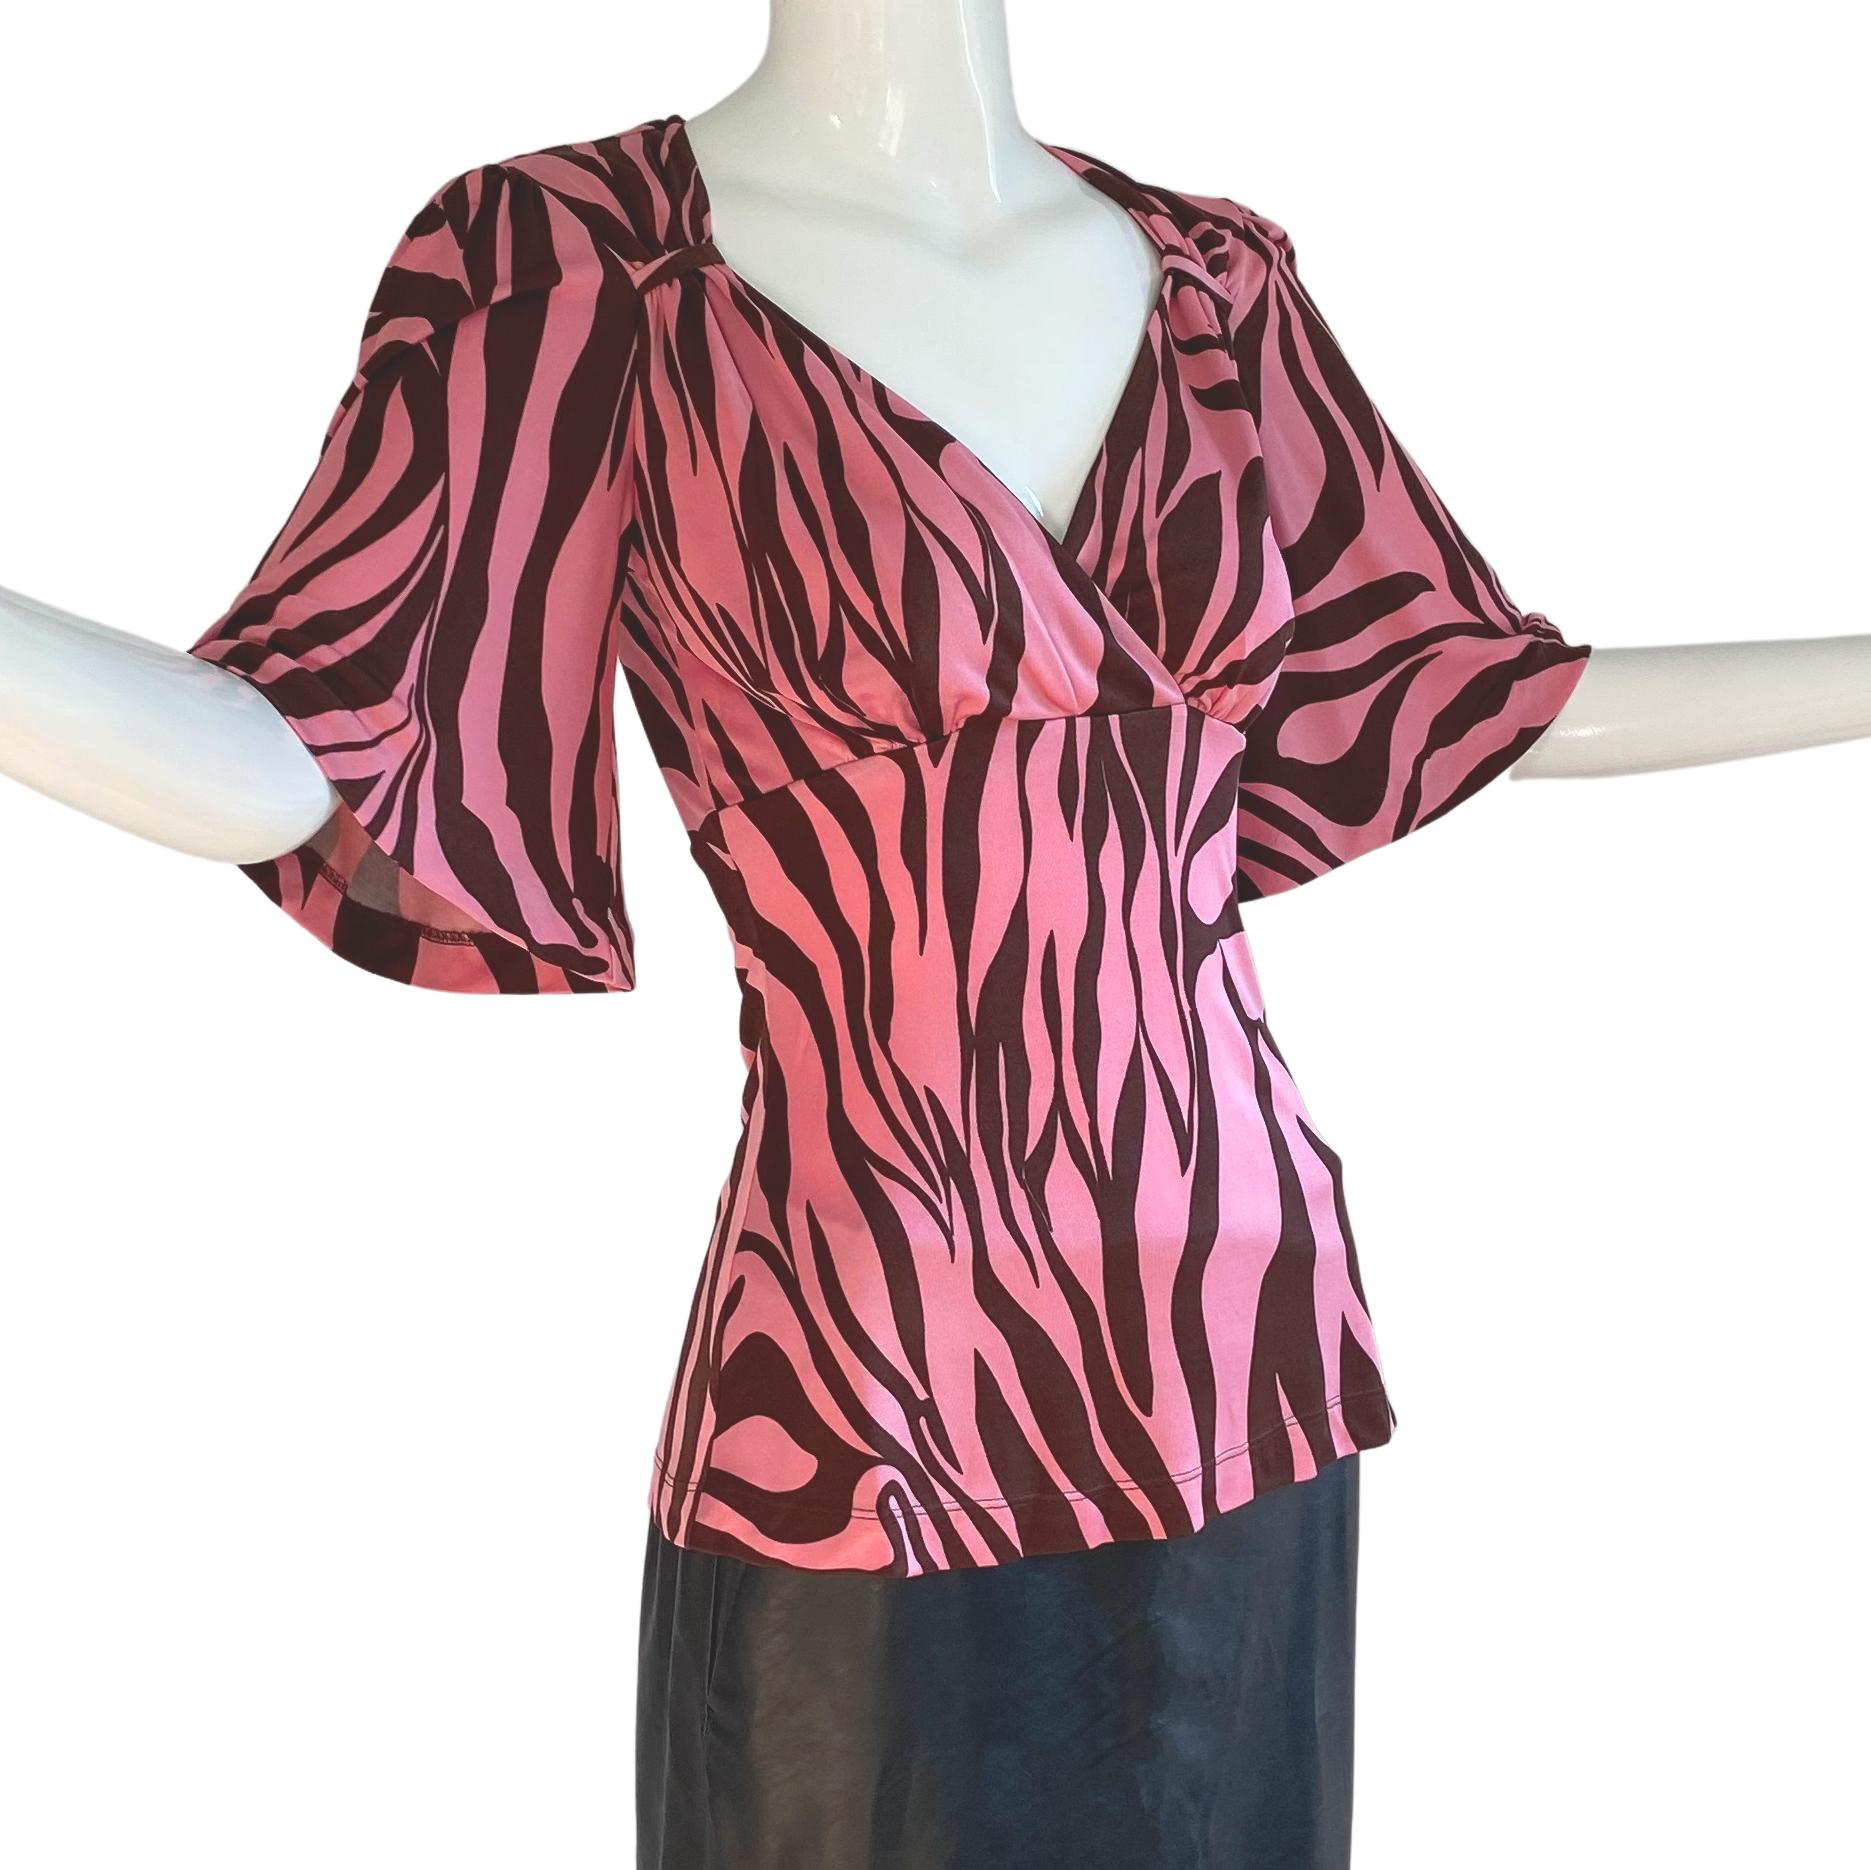 Versatile Blouse top with flattering bell sleeves and a deep V neck.
Approximately 25